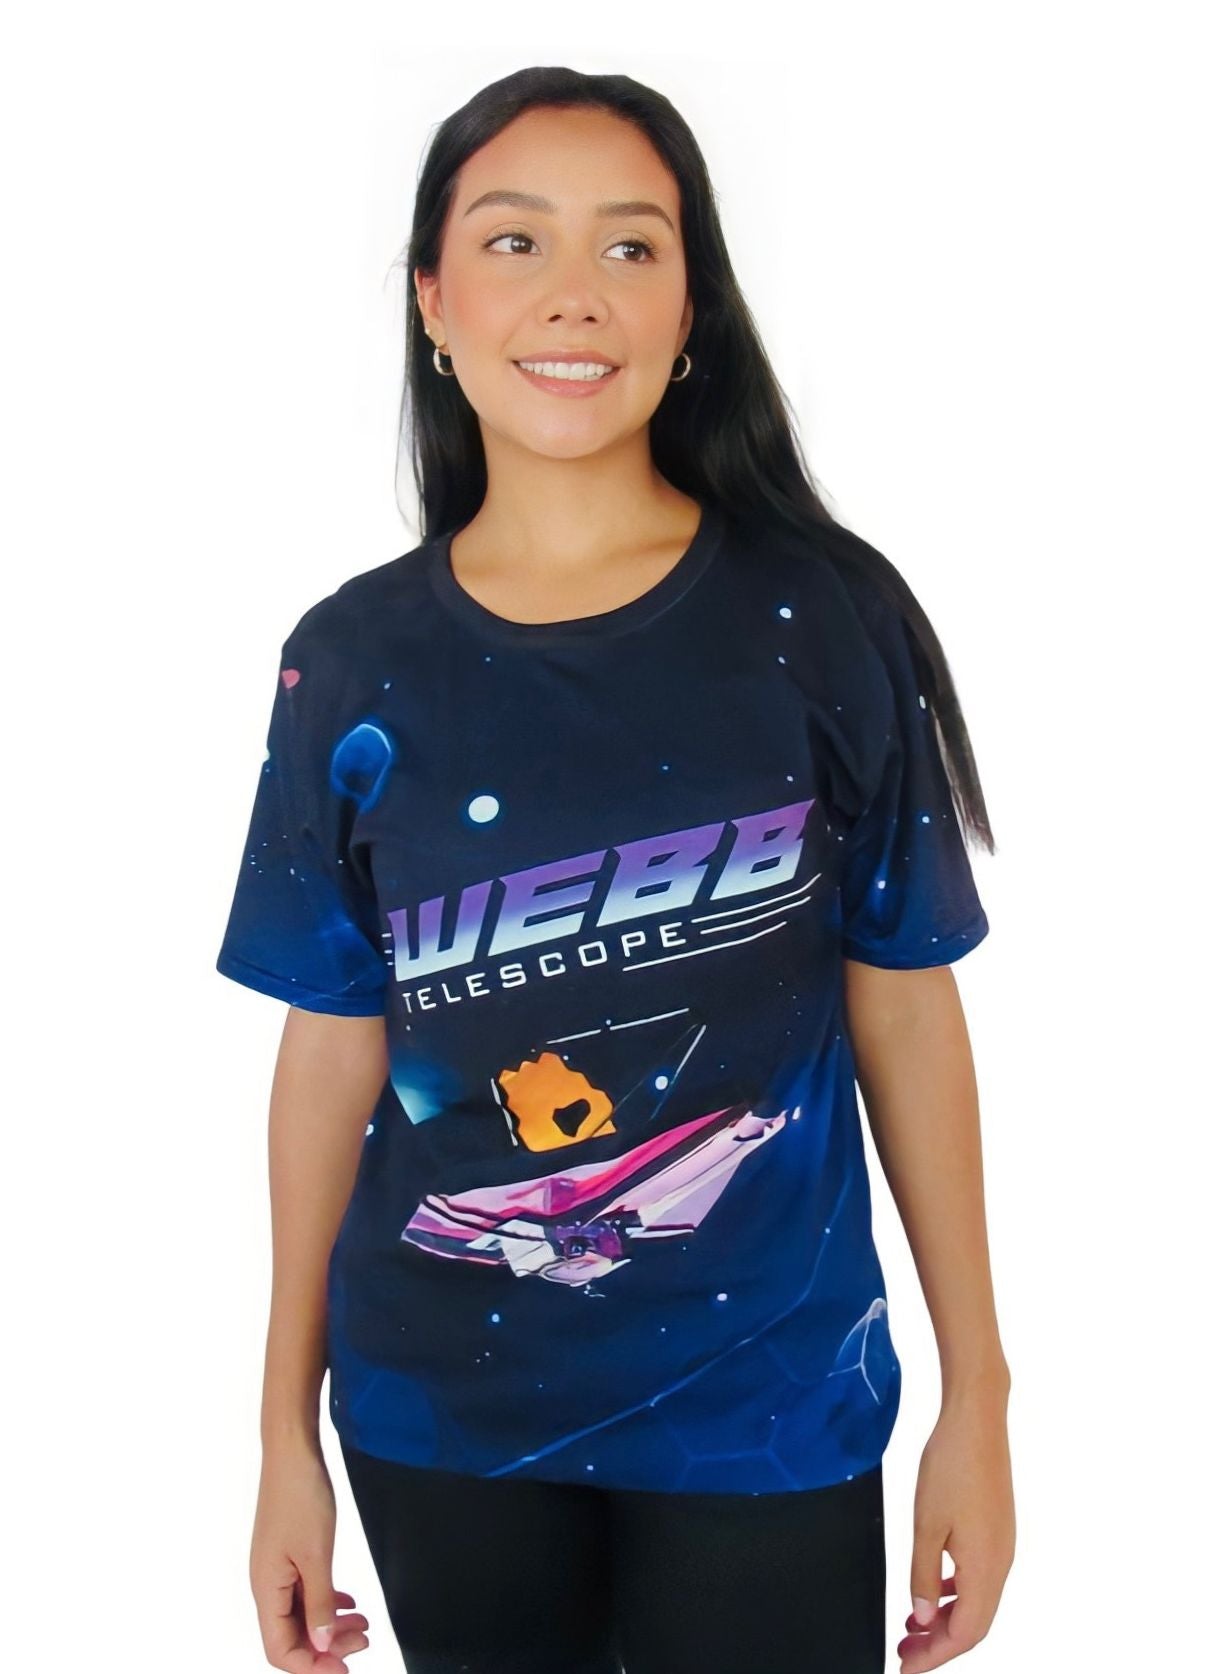 WEBB Telescope Youth crew neck t-shirt 8 to 20 with WEBB Logo - The Space Store